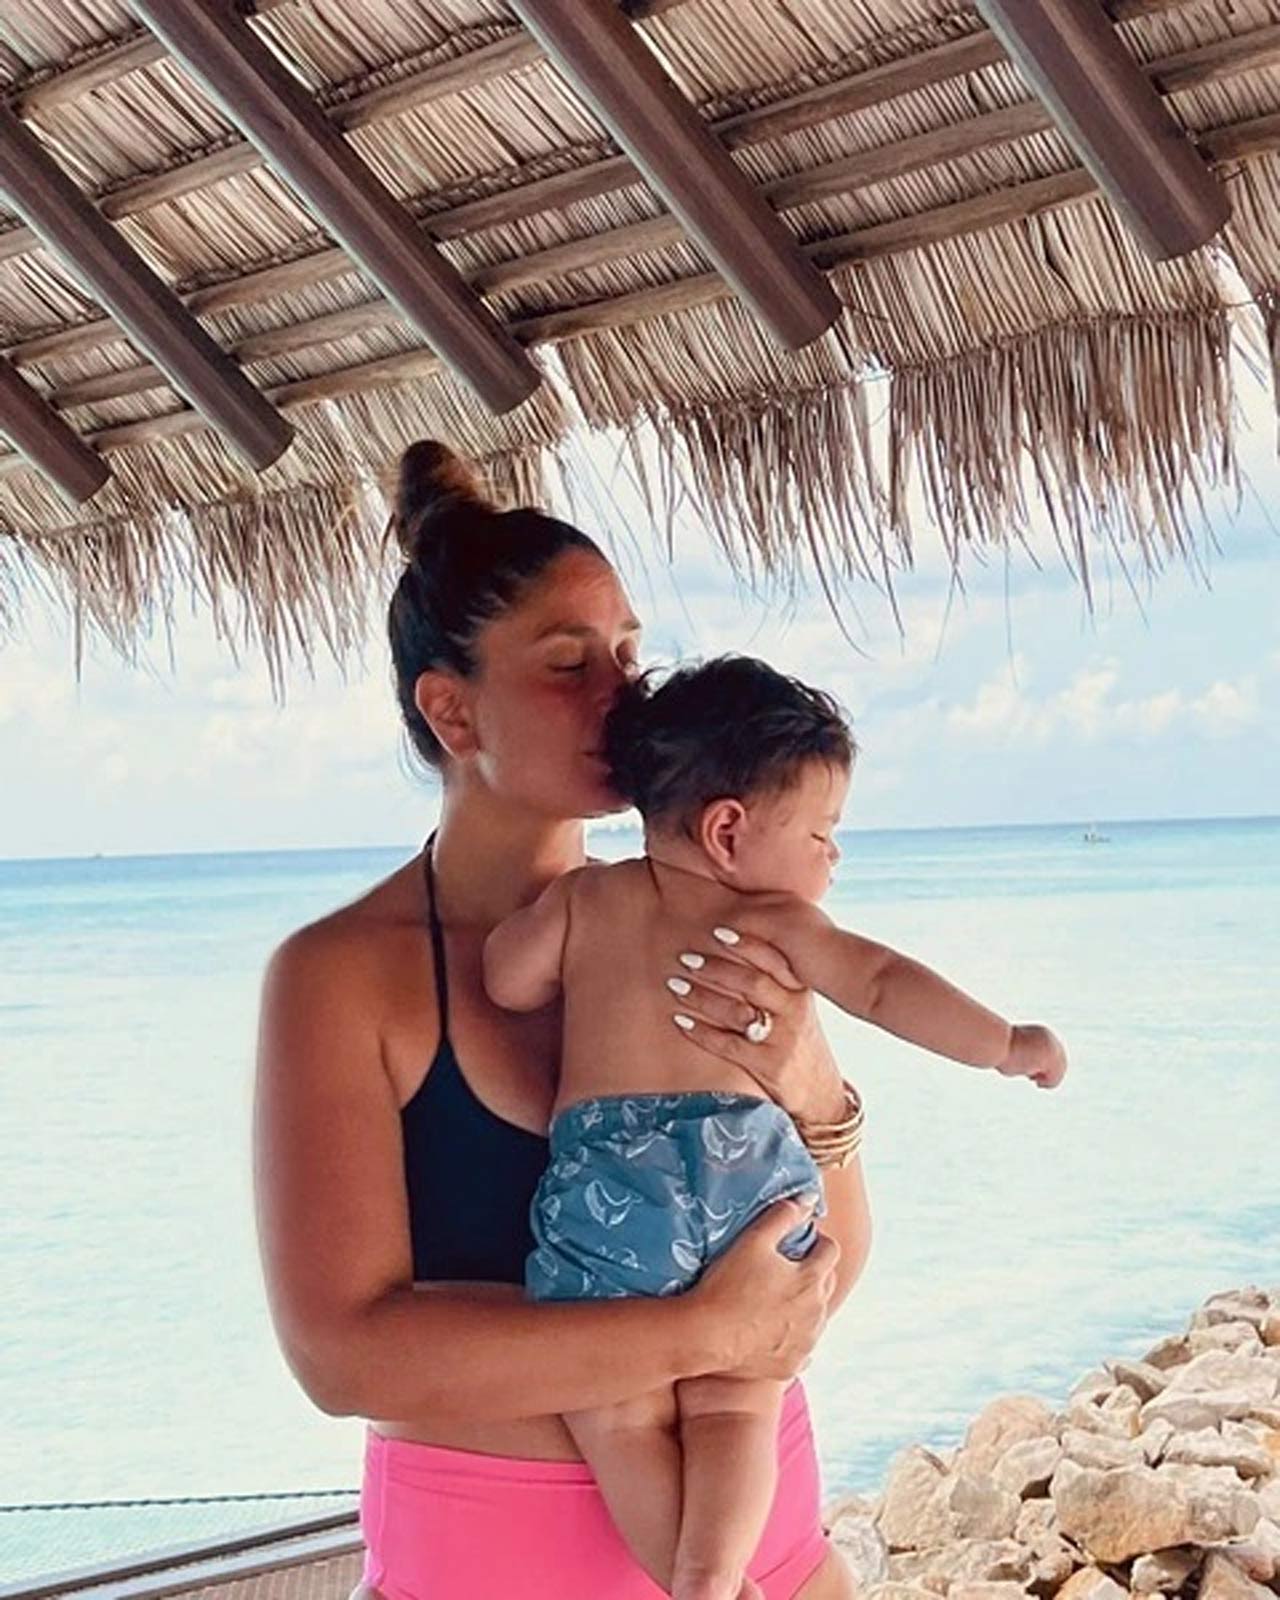 Kareena Kapoor Khan, Saif Ali Khan, Taimur Ali Khan and newborn Jeh travelled a few times this year. This picture was shared by the actress to celebrate Jeh's six months. Donning a black and pink bikini, Kareena and baby Jeh gave us some major vacation goals. The Khan family have been on multiple vacations this year, to mark anniversaries and birthdays together. Well, they were truly busy making memories.